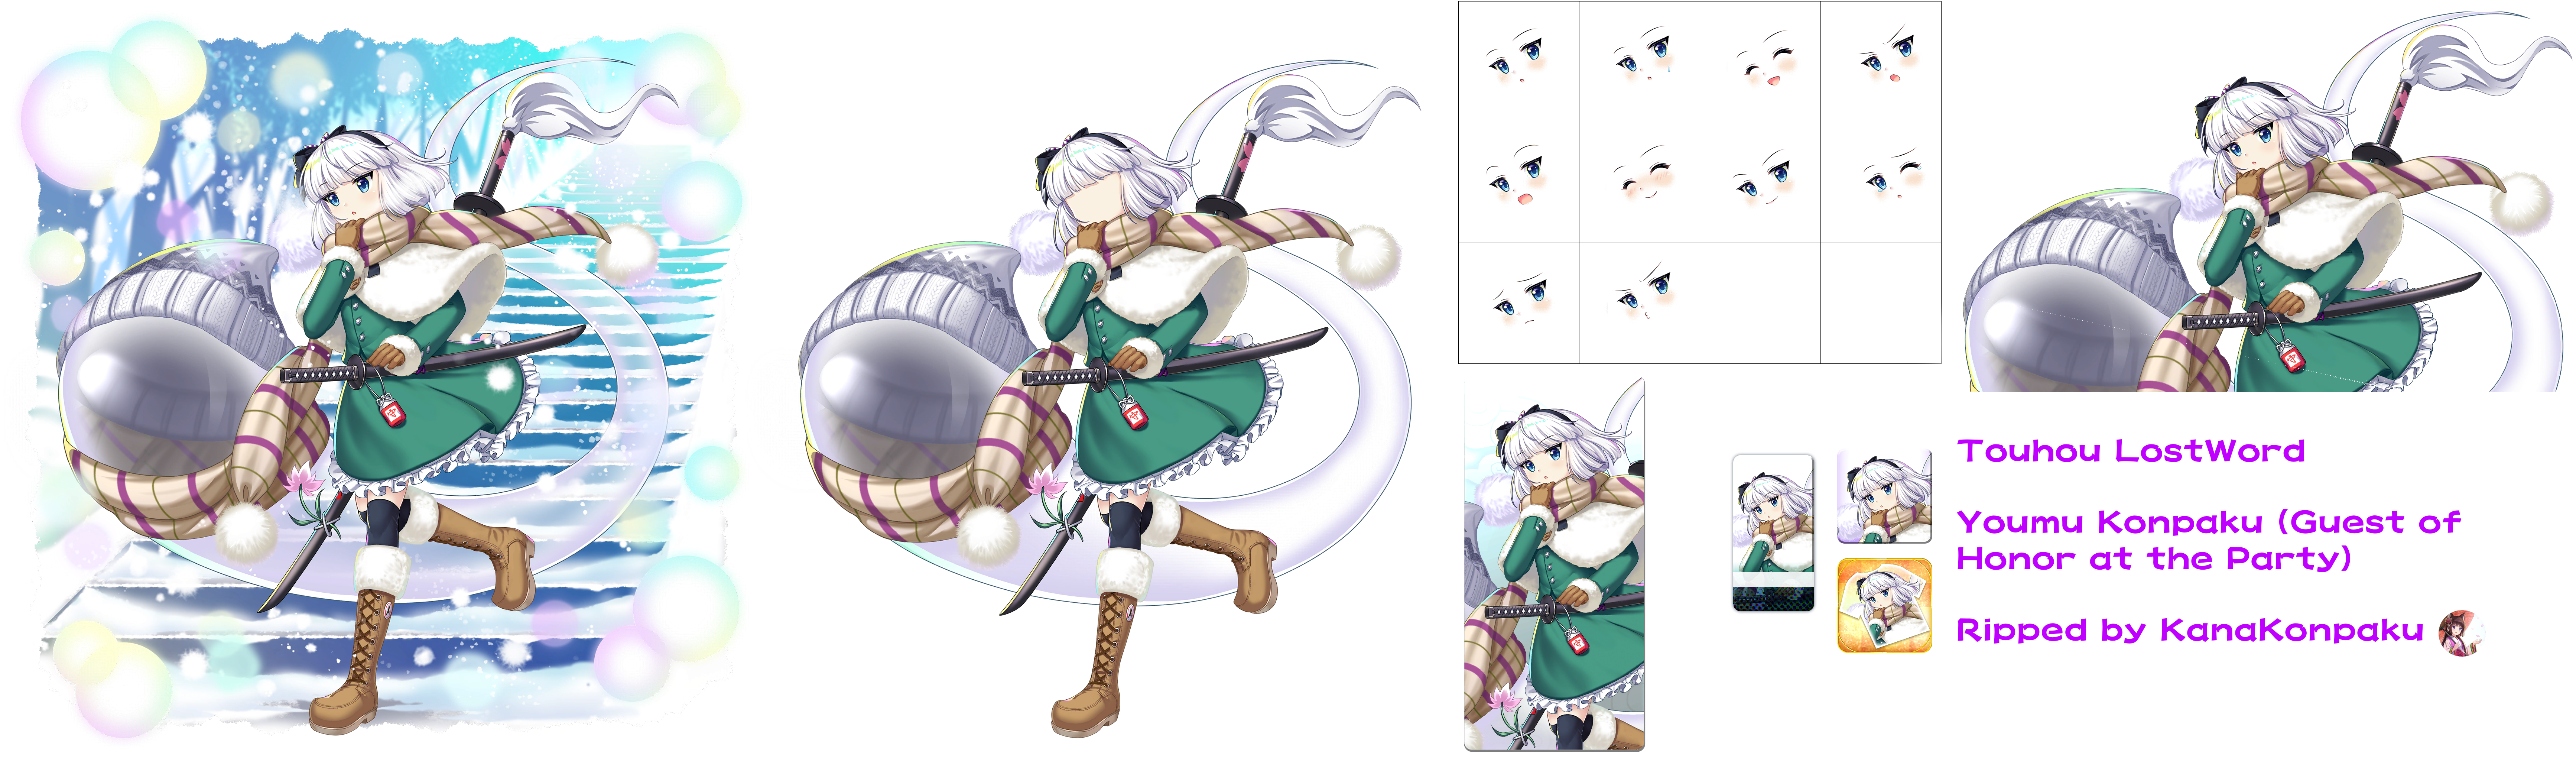 Touhou LostWord - Youmu Konpaku (Guest of Honor at the Party)